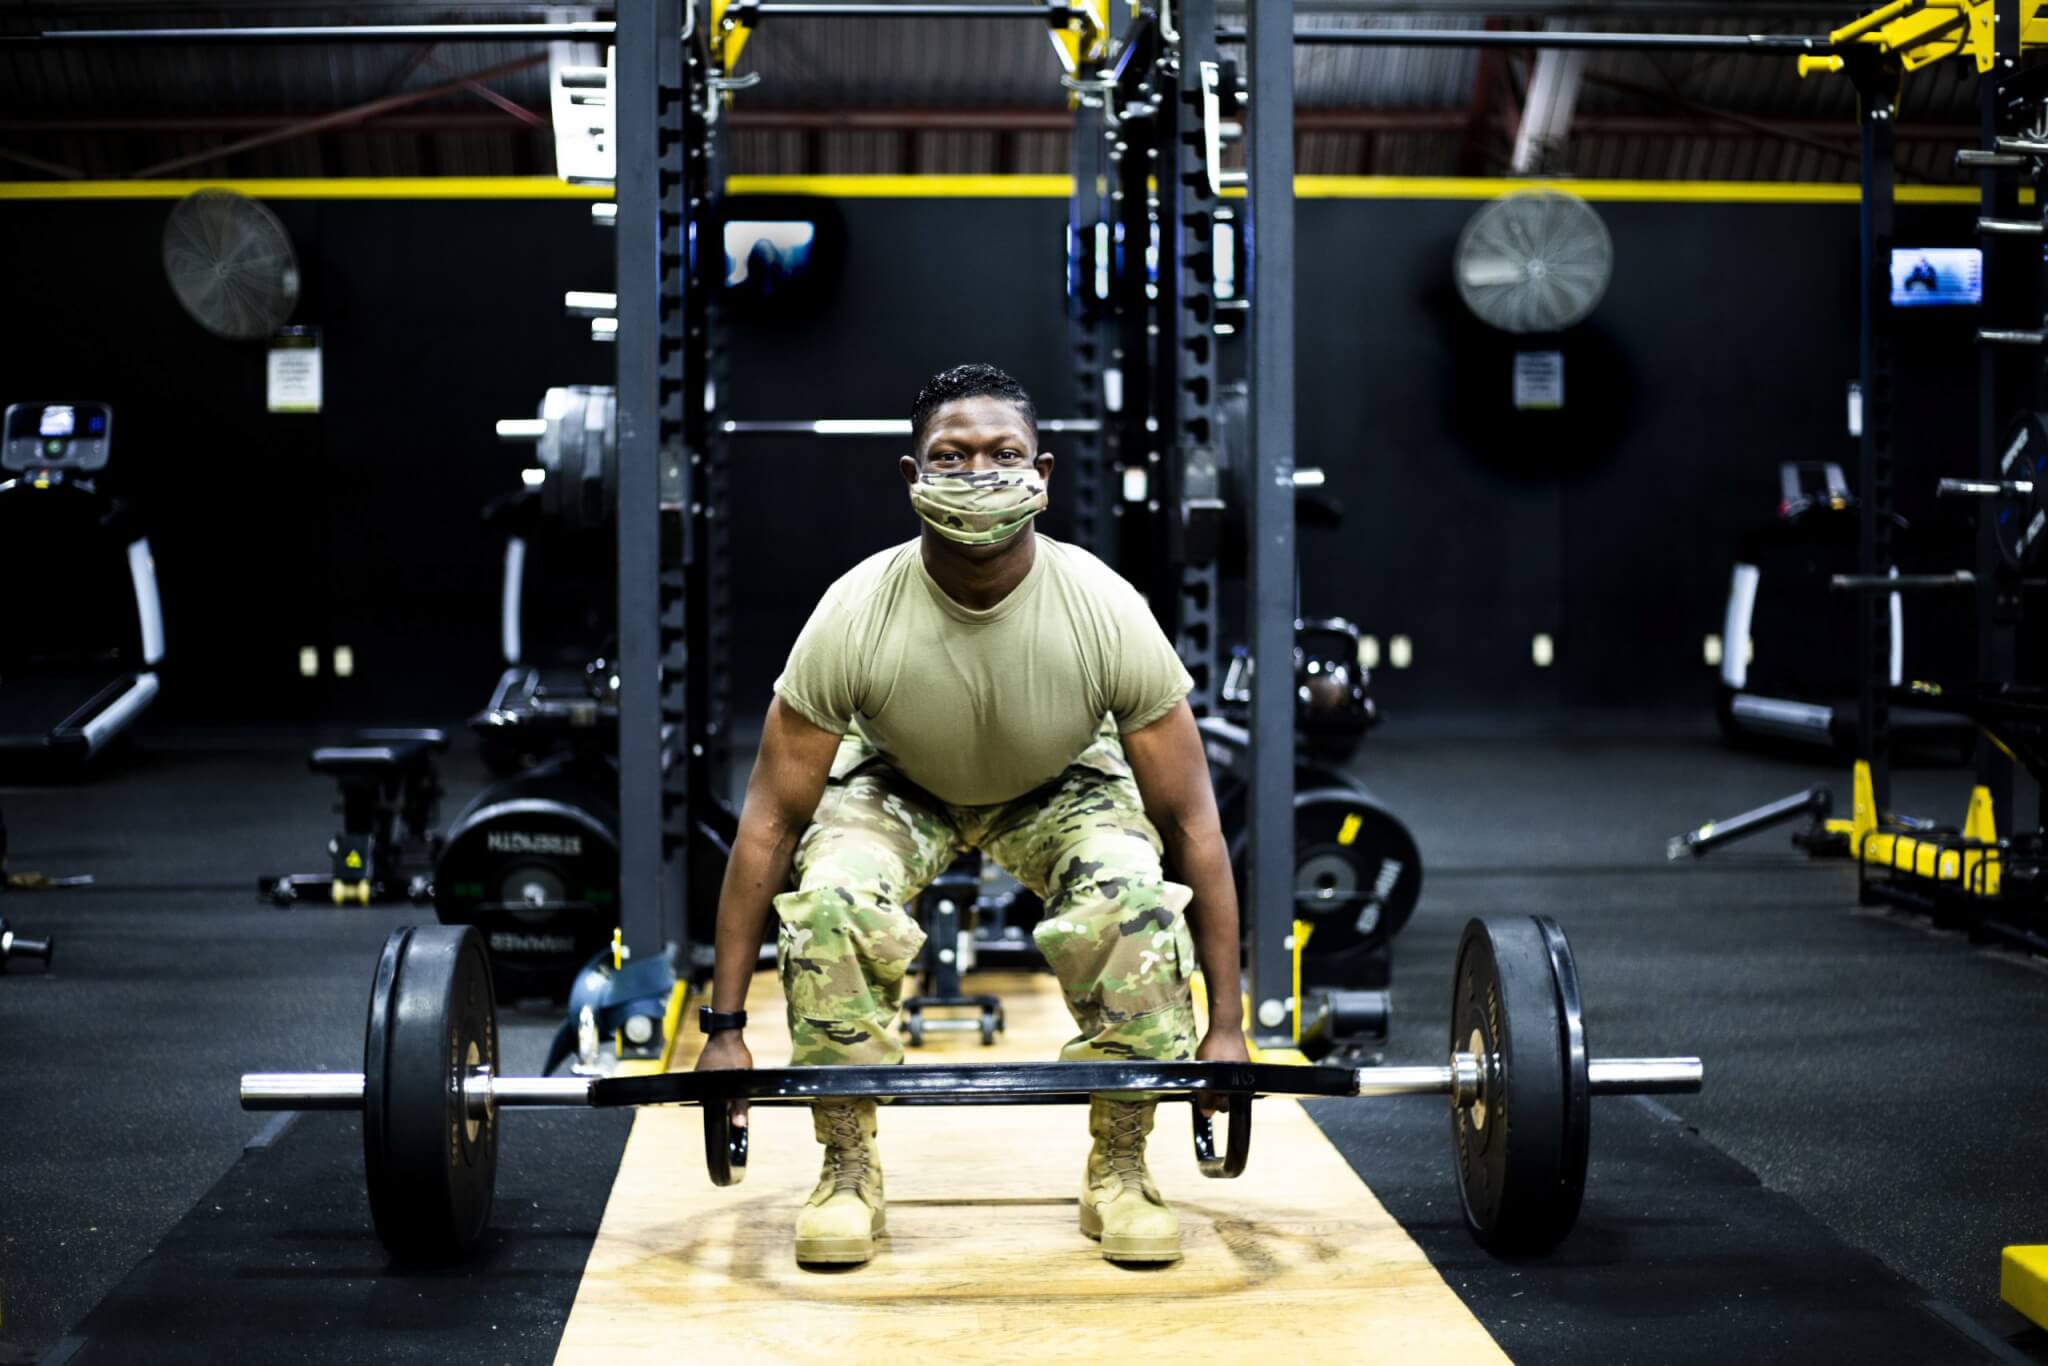 Staff Sgt. Roger Jackson trains for the Army Combat Fitness Test by honing his dead lift skills Nov. 7, 2020, at Fort Lee, Virginia. (Photo by Staff Sgt. Elizabeth Szoke)